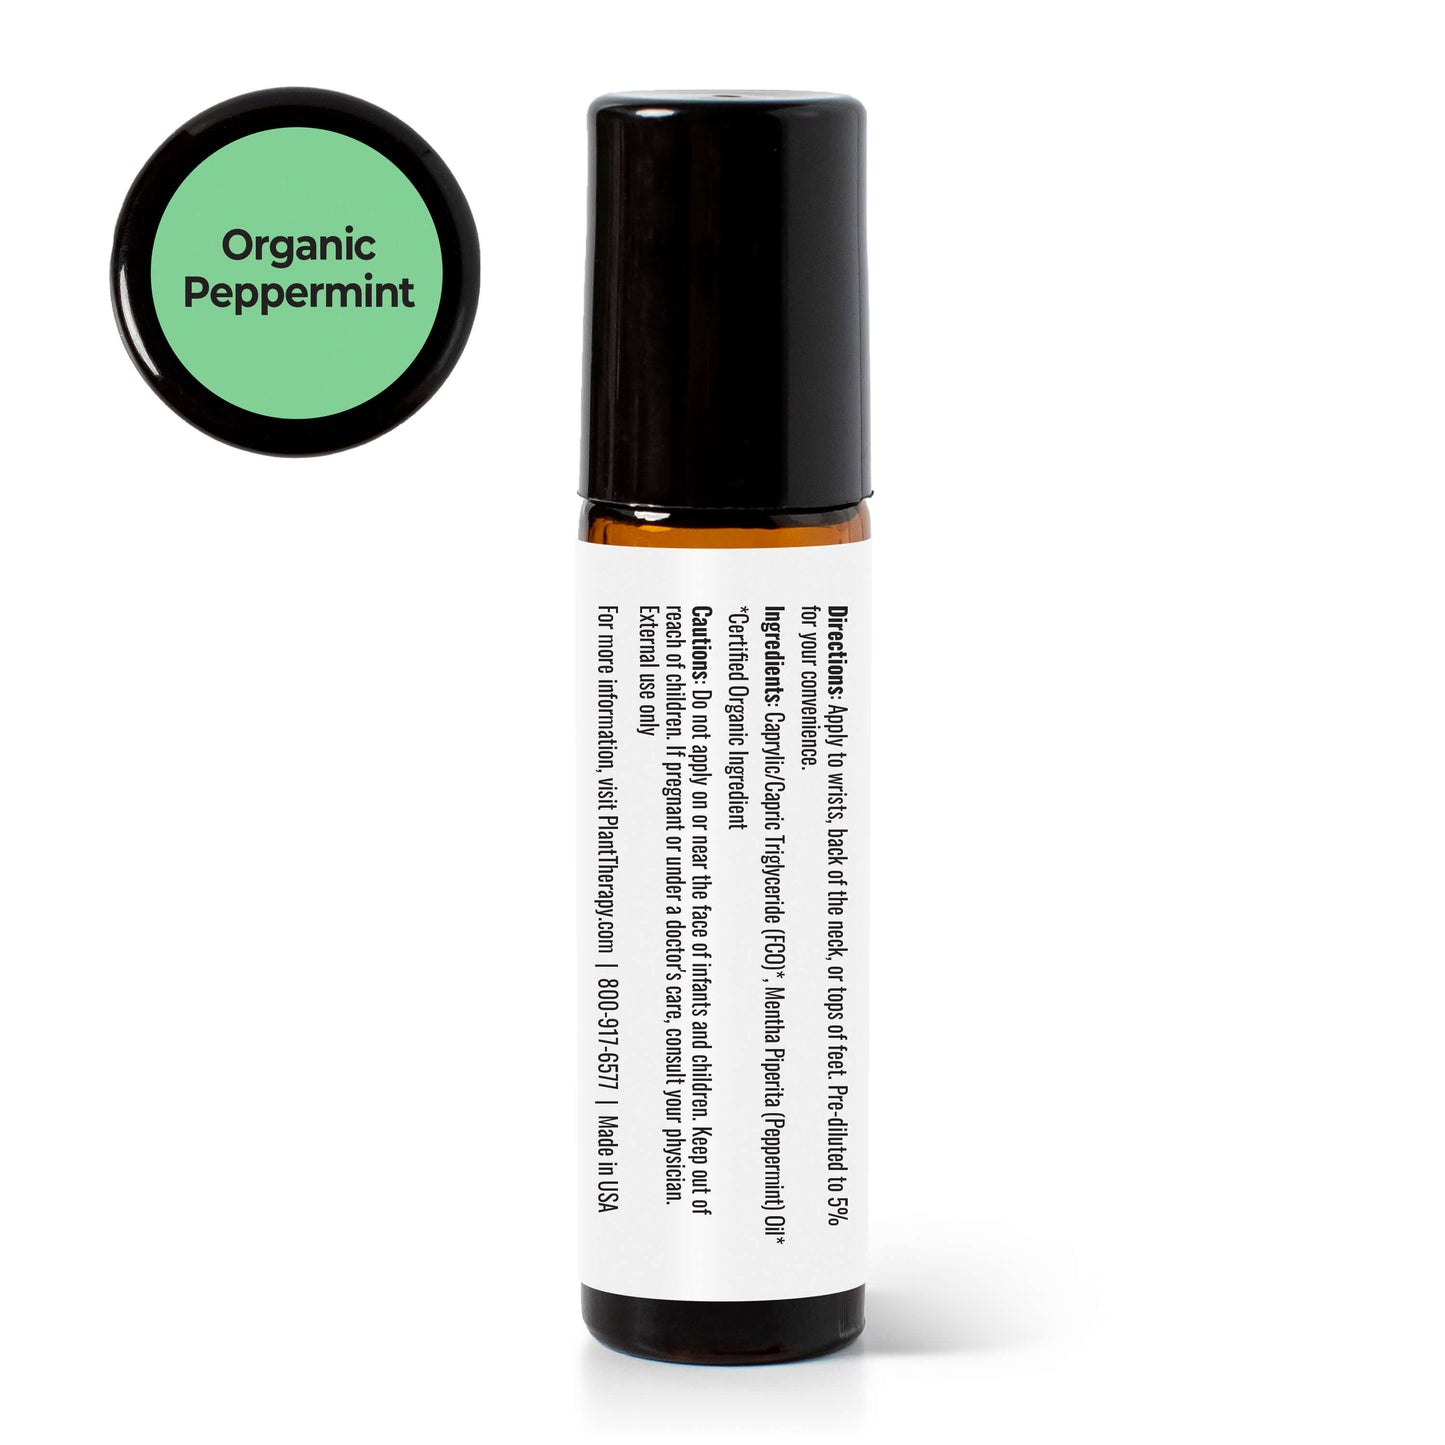 Organic Peppermint Essential Oil Pre-Diluted Roll-On back label